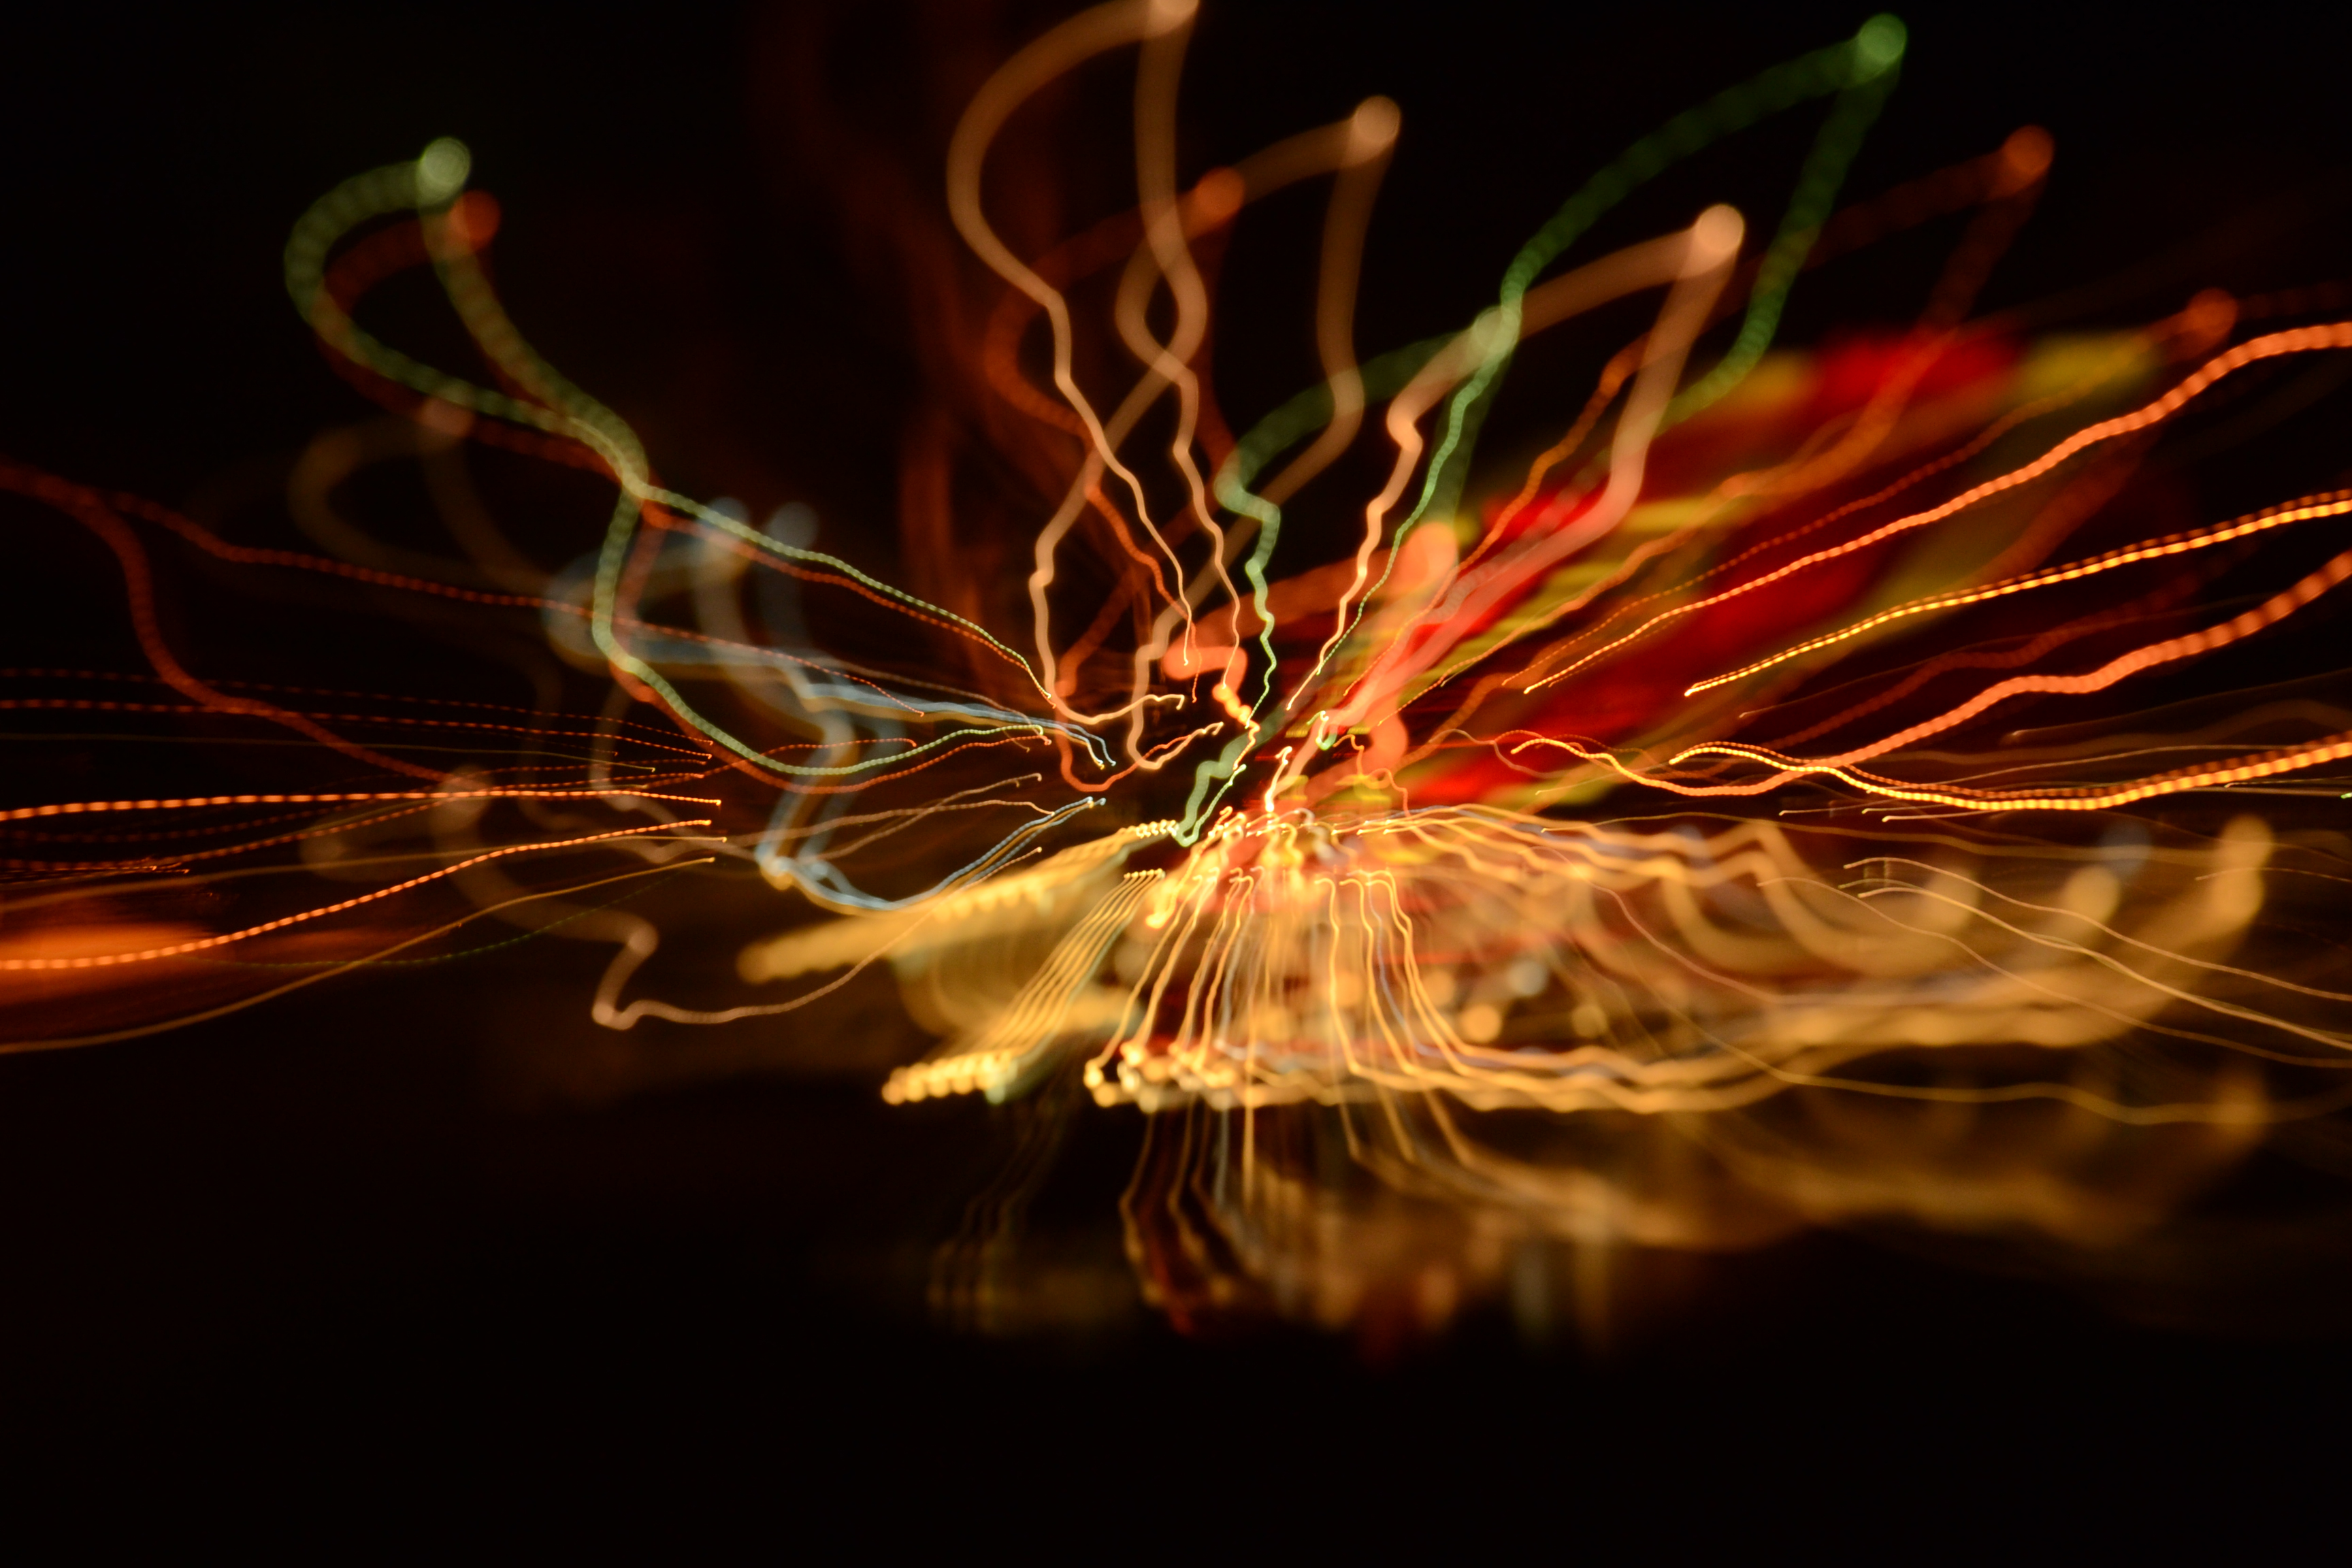 Abstract light effect by xcreez on DeviantArt